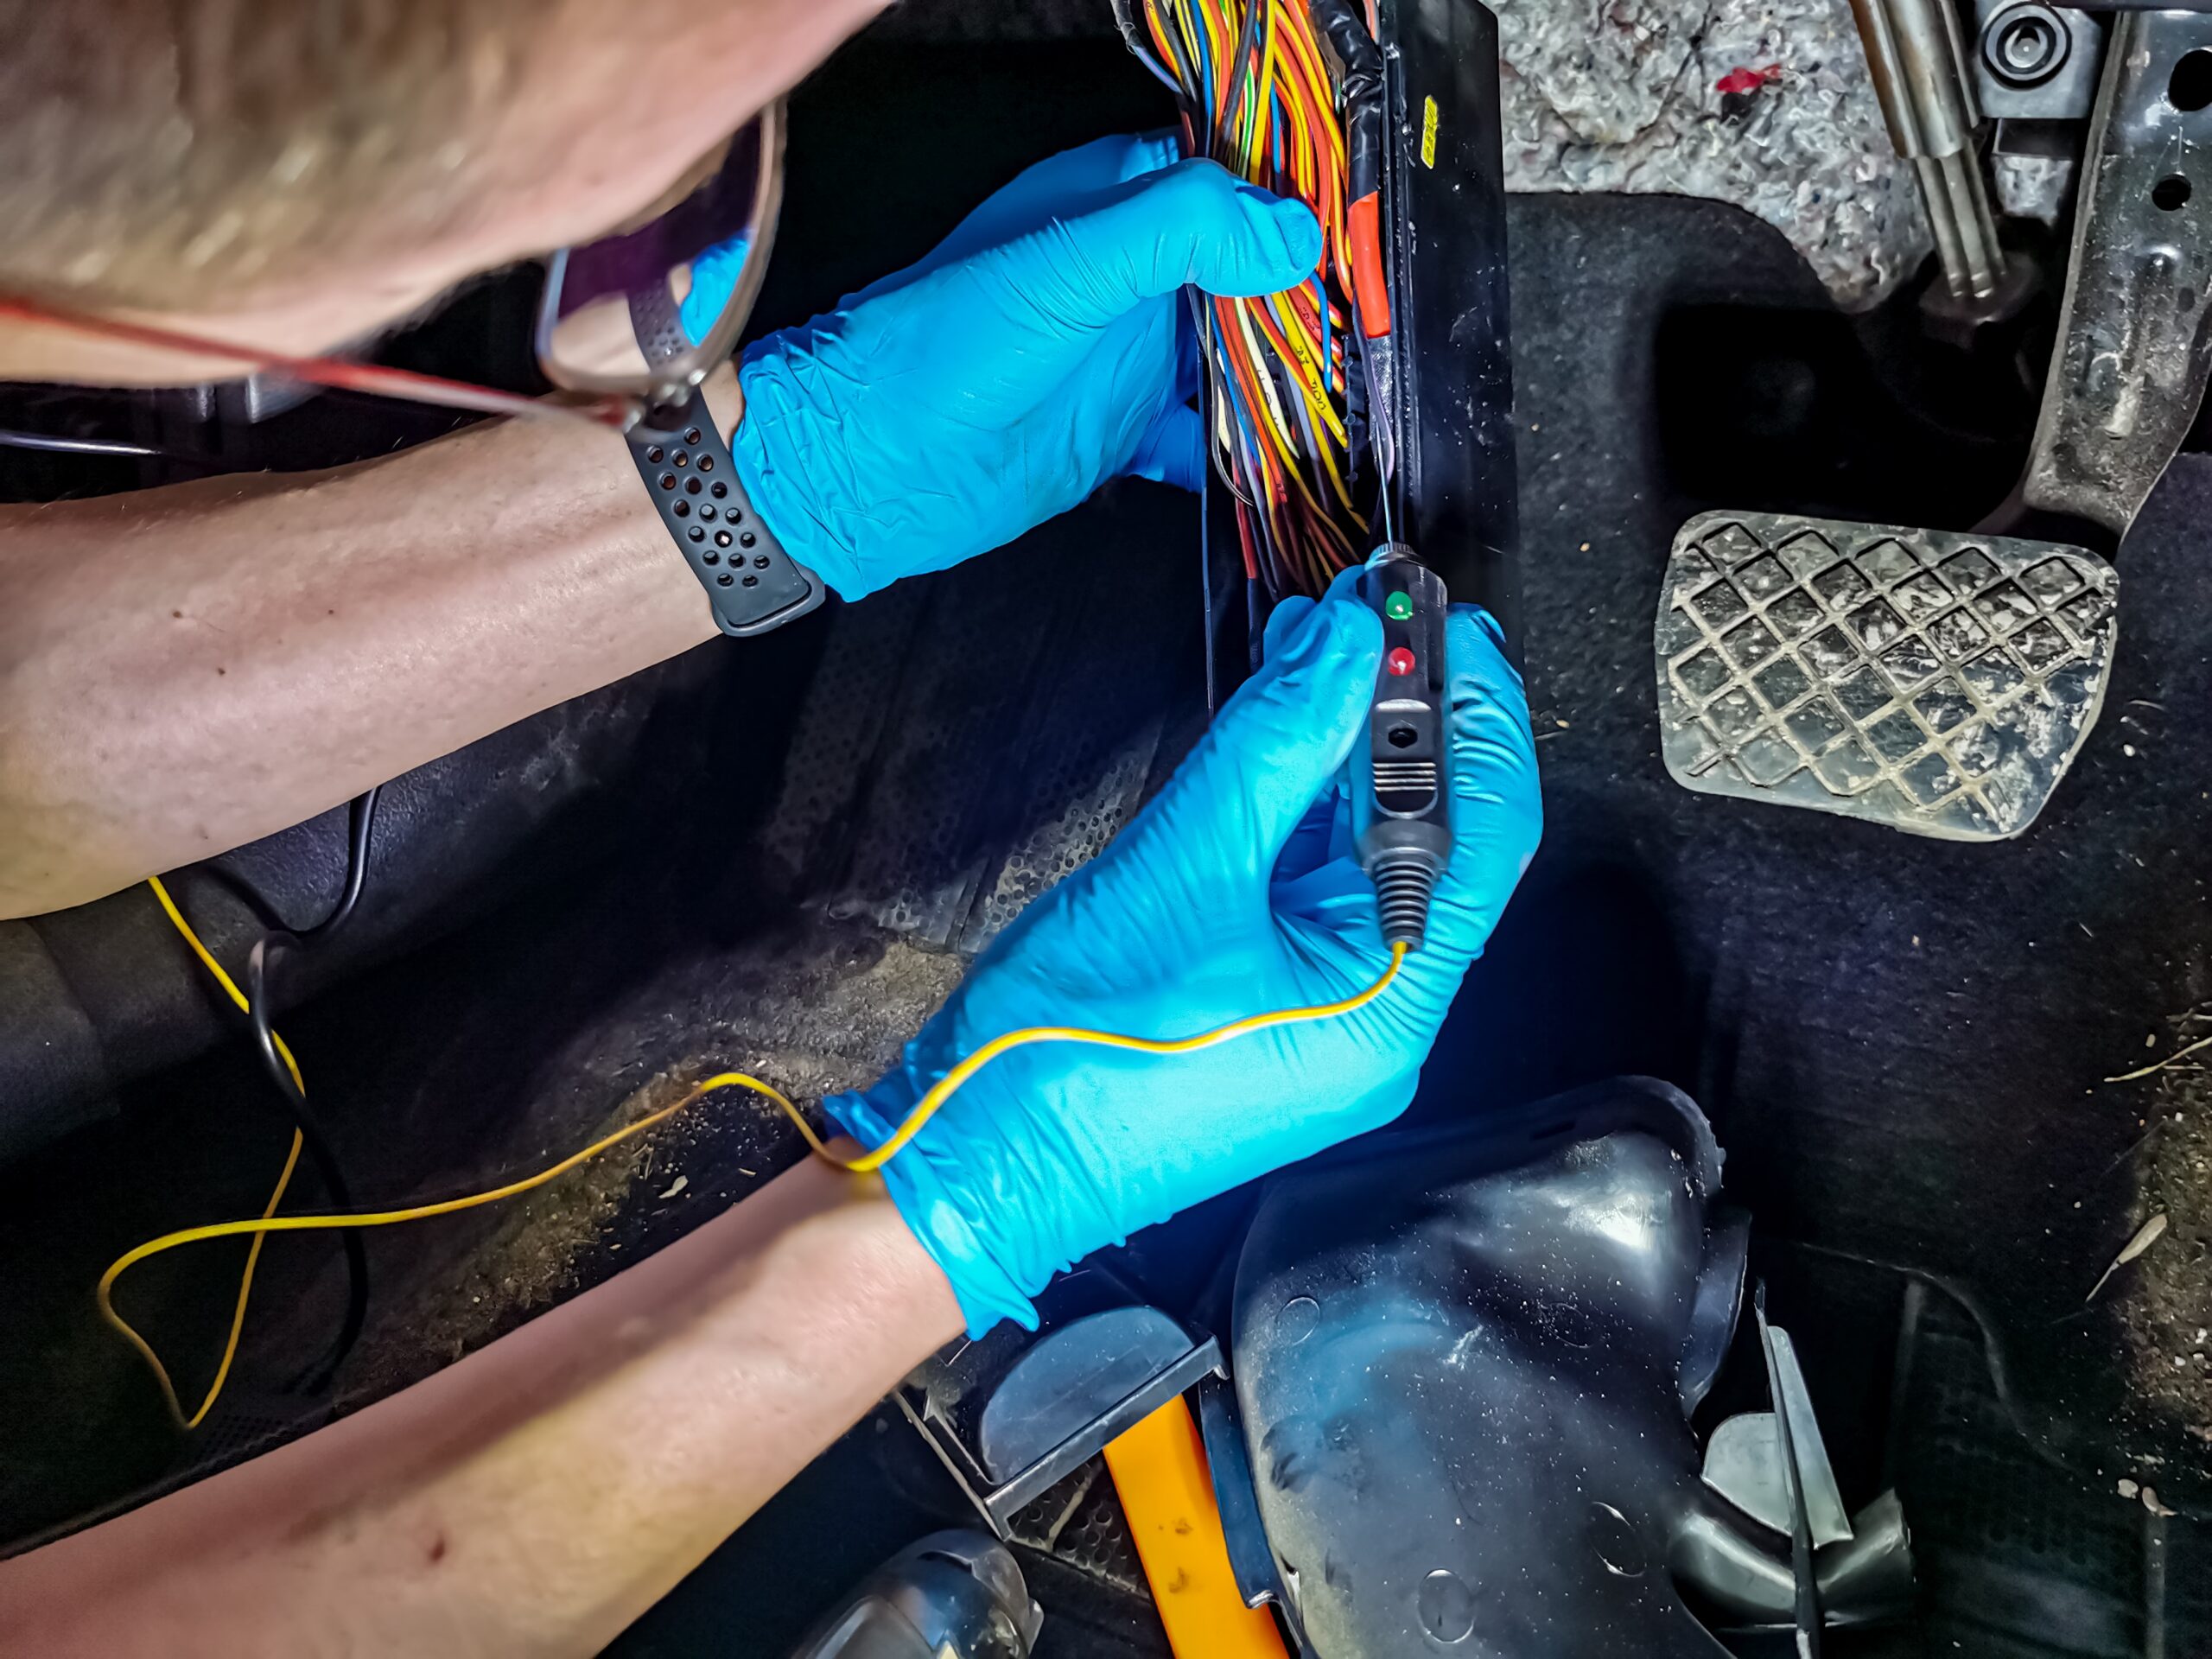 Checking wires in car